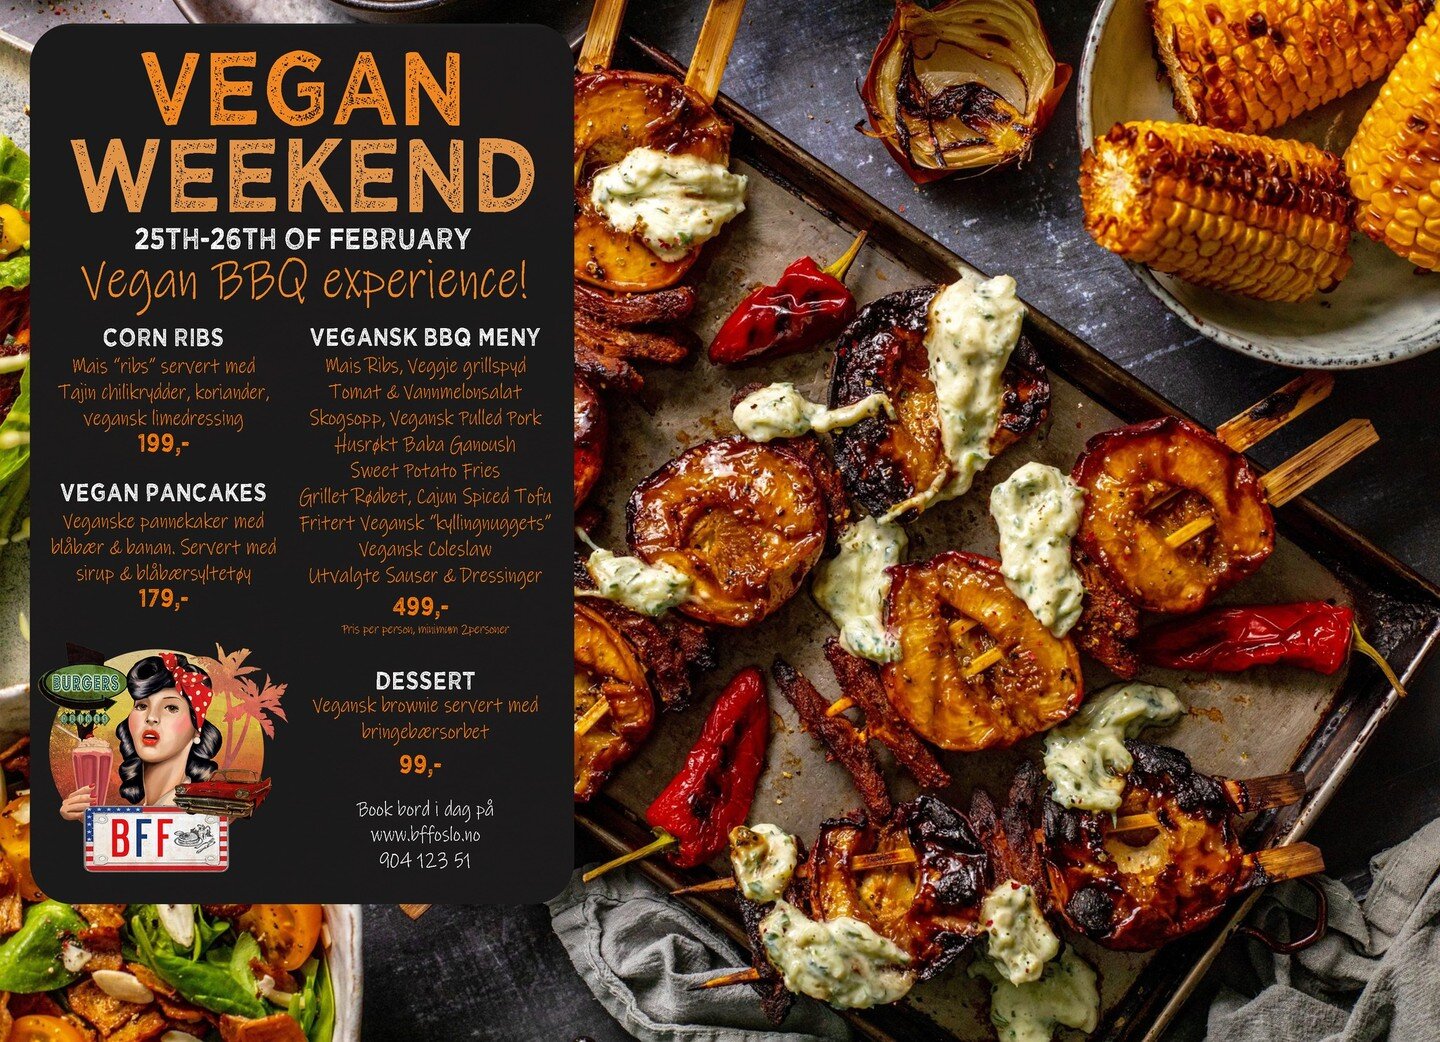 Last day of Vegan Weekend if you are up for some BBQ at @bff_oslo Frogner 🤩